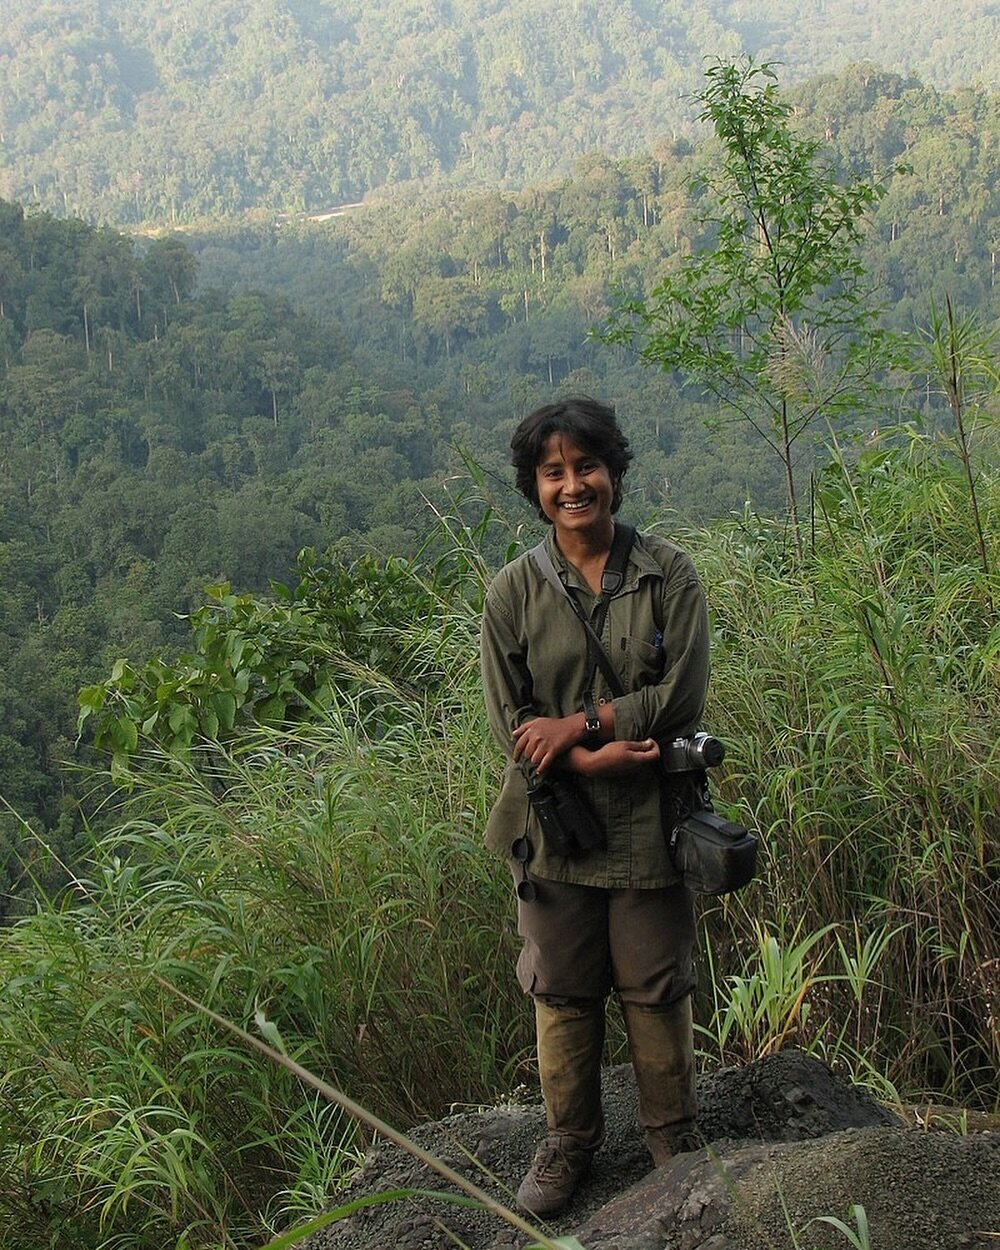 Congrats to 2009 Fellow, Conservation Expert &amp; Wildlife Biologist, Aparajita Datta, who is a ✨Whitley Fund for Nature Continuation Funding Recipient✨; to help support her conservation solutions in the Eastern Himalayan region of India.

🌎🌏🌍

A